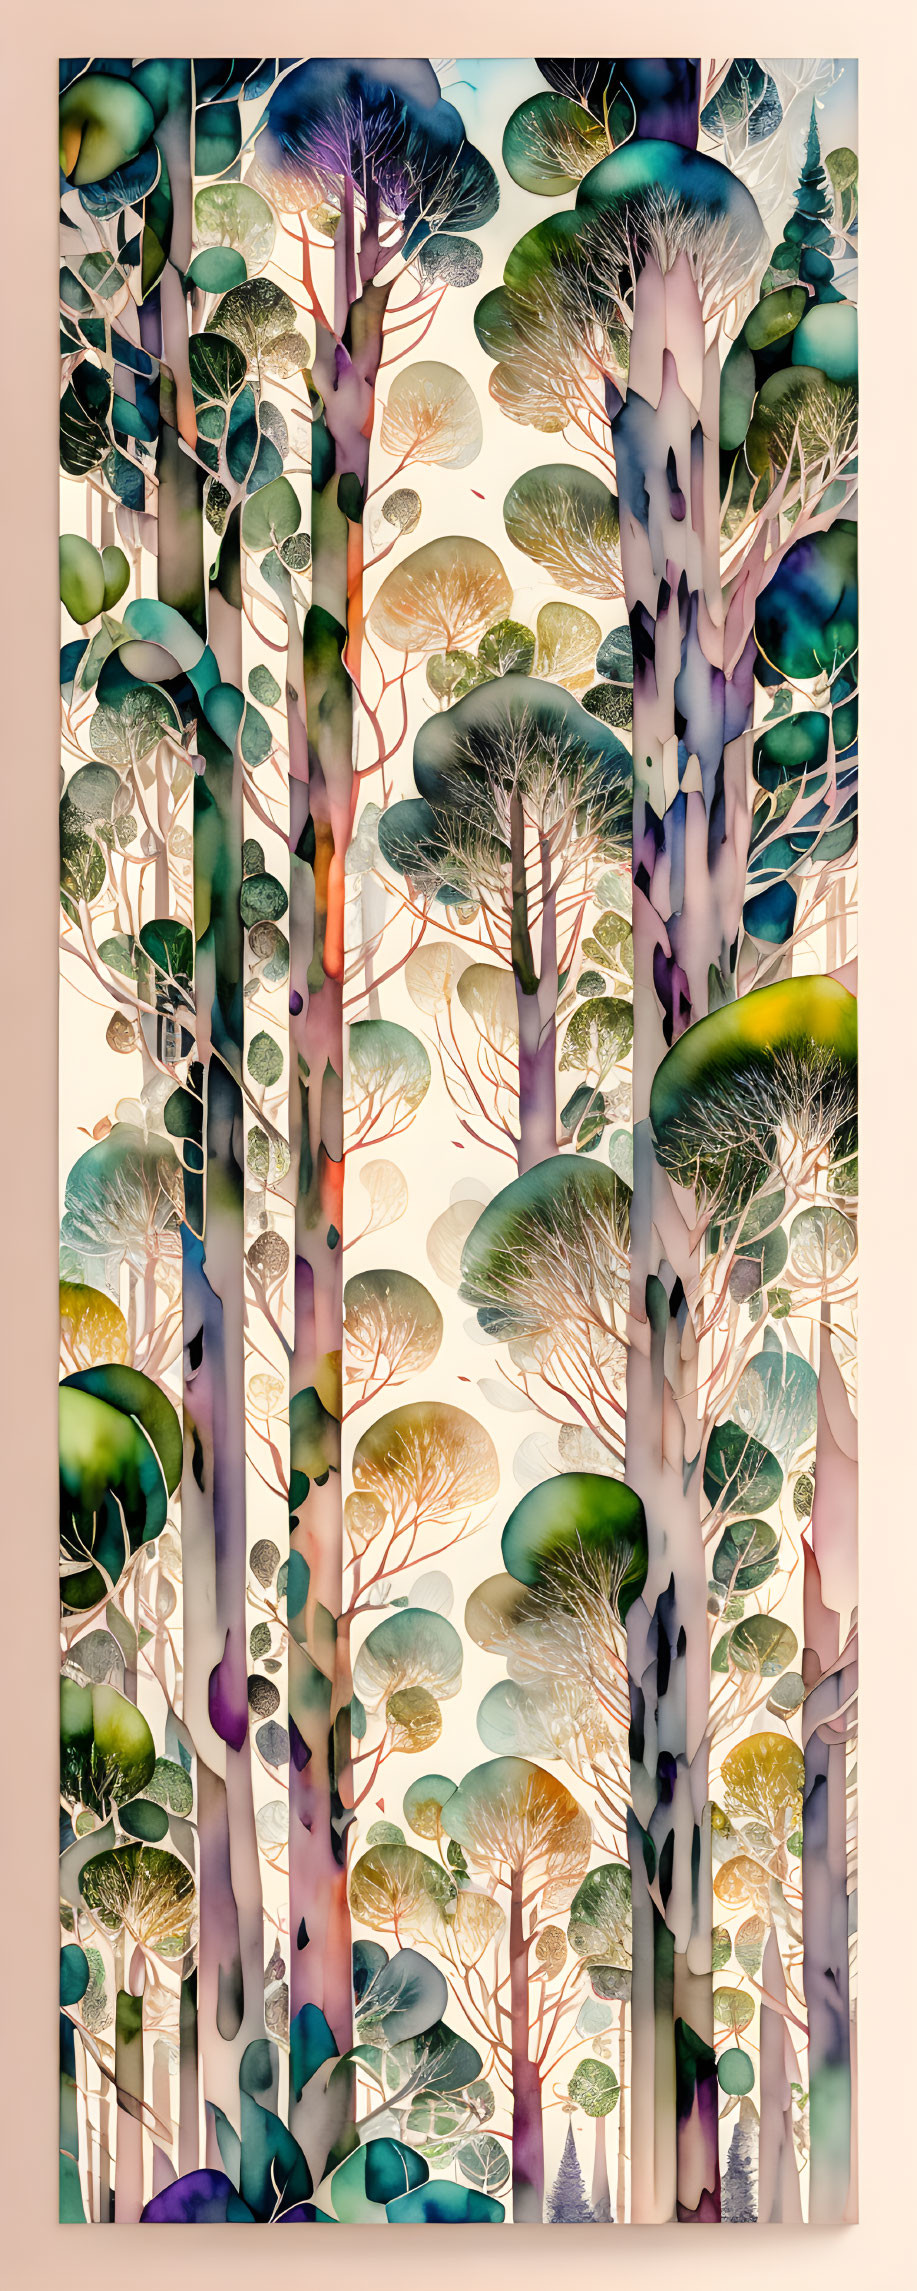 Forest with Tall, Slender Trees and Colorful Canopy